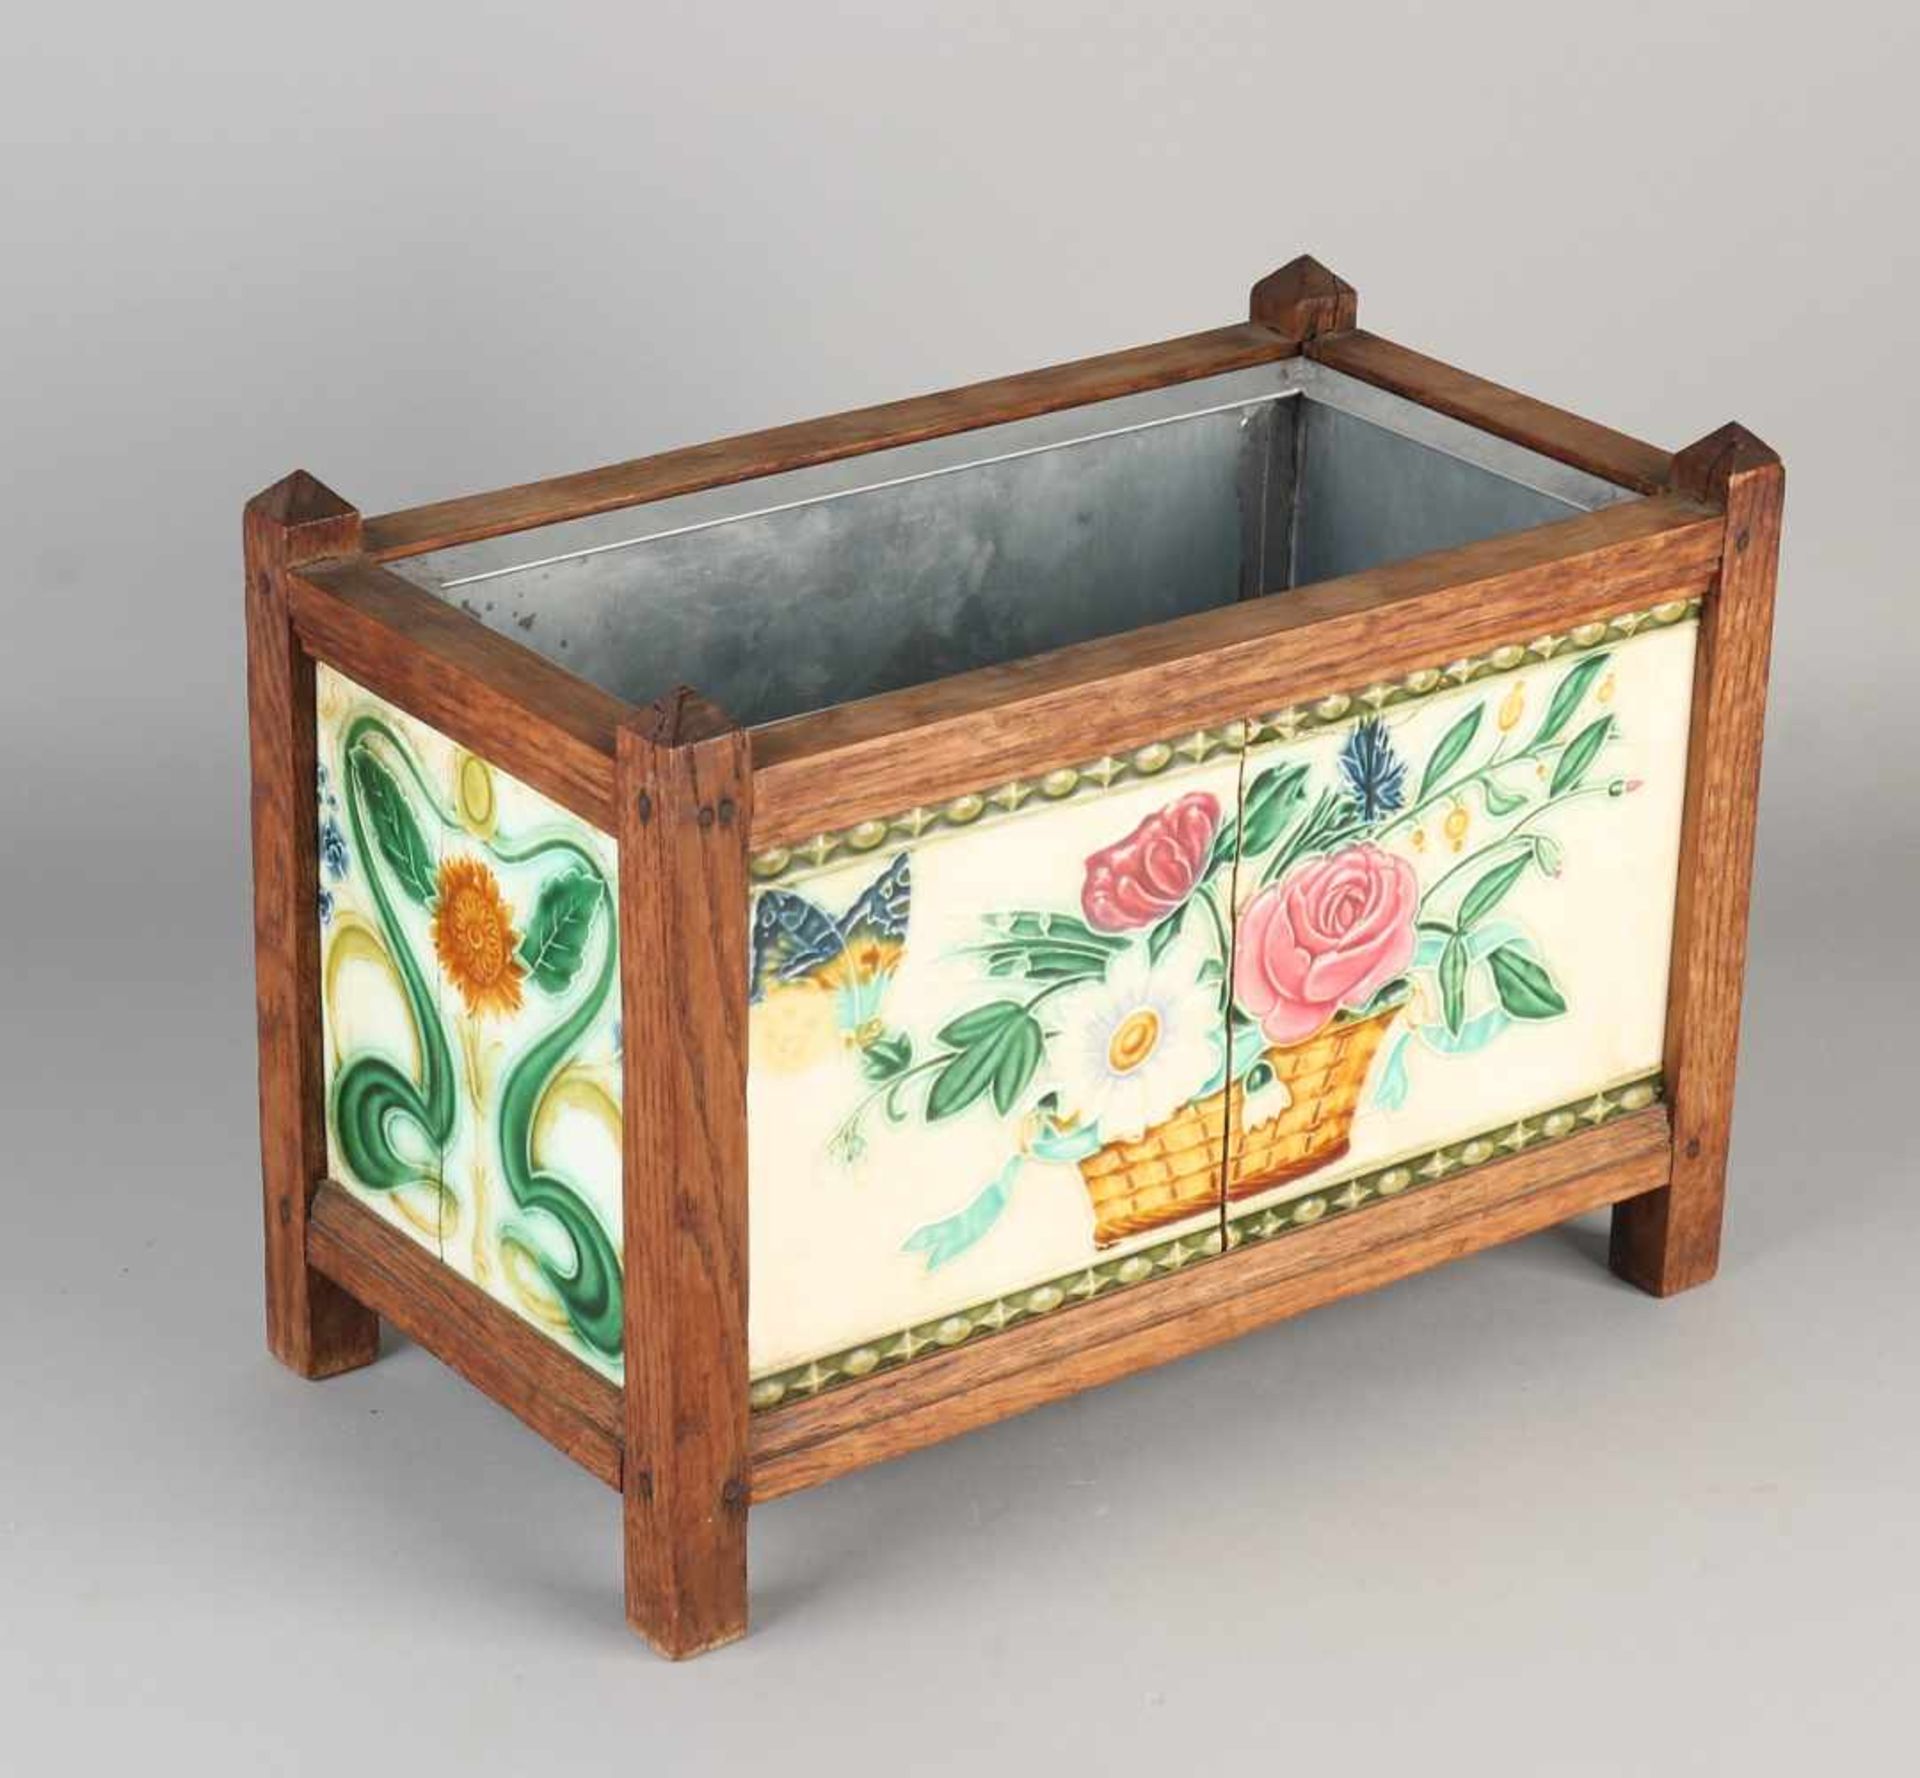 Antique Majolica jardiniere with tiles. Circa 1910 Oak and sink planter. Size: 24 x 34 x 20 cm. In